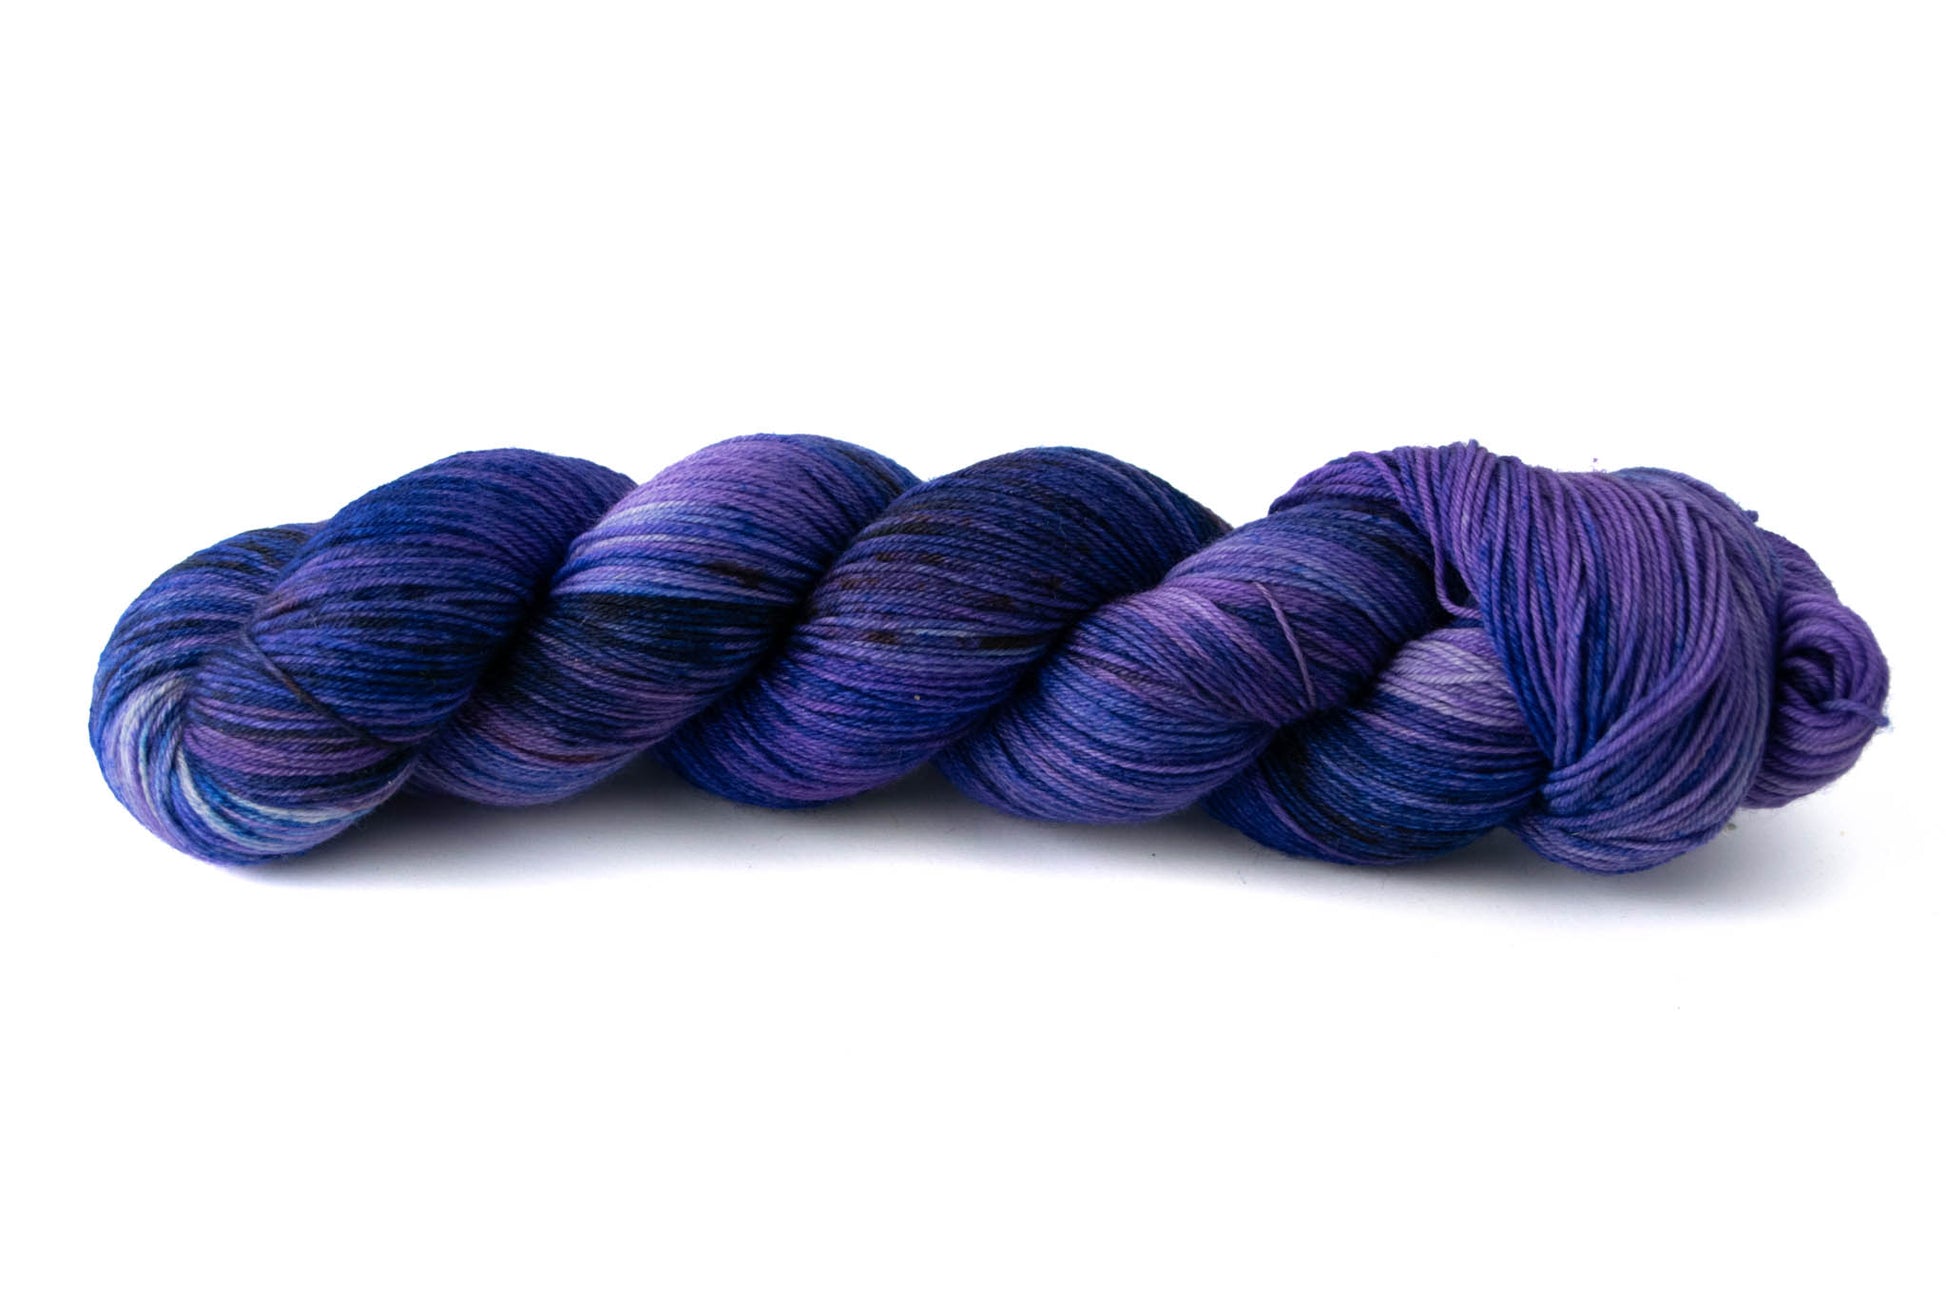 A skein of variegated violet and deep sky blue hand-dyed wool yarn.